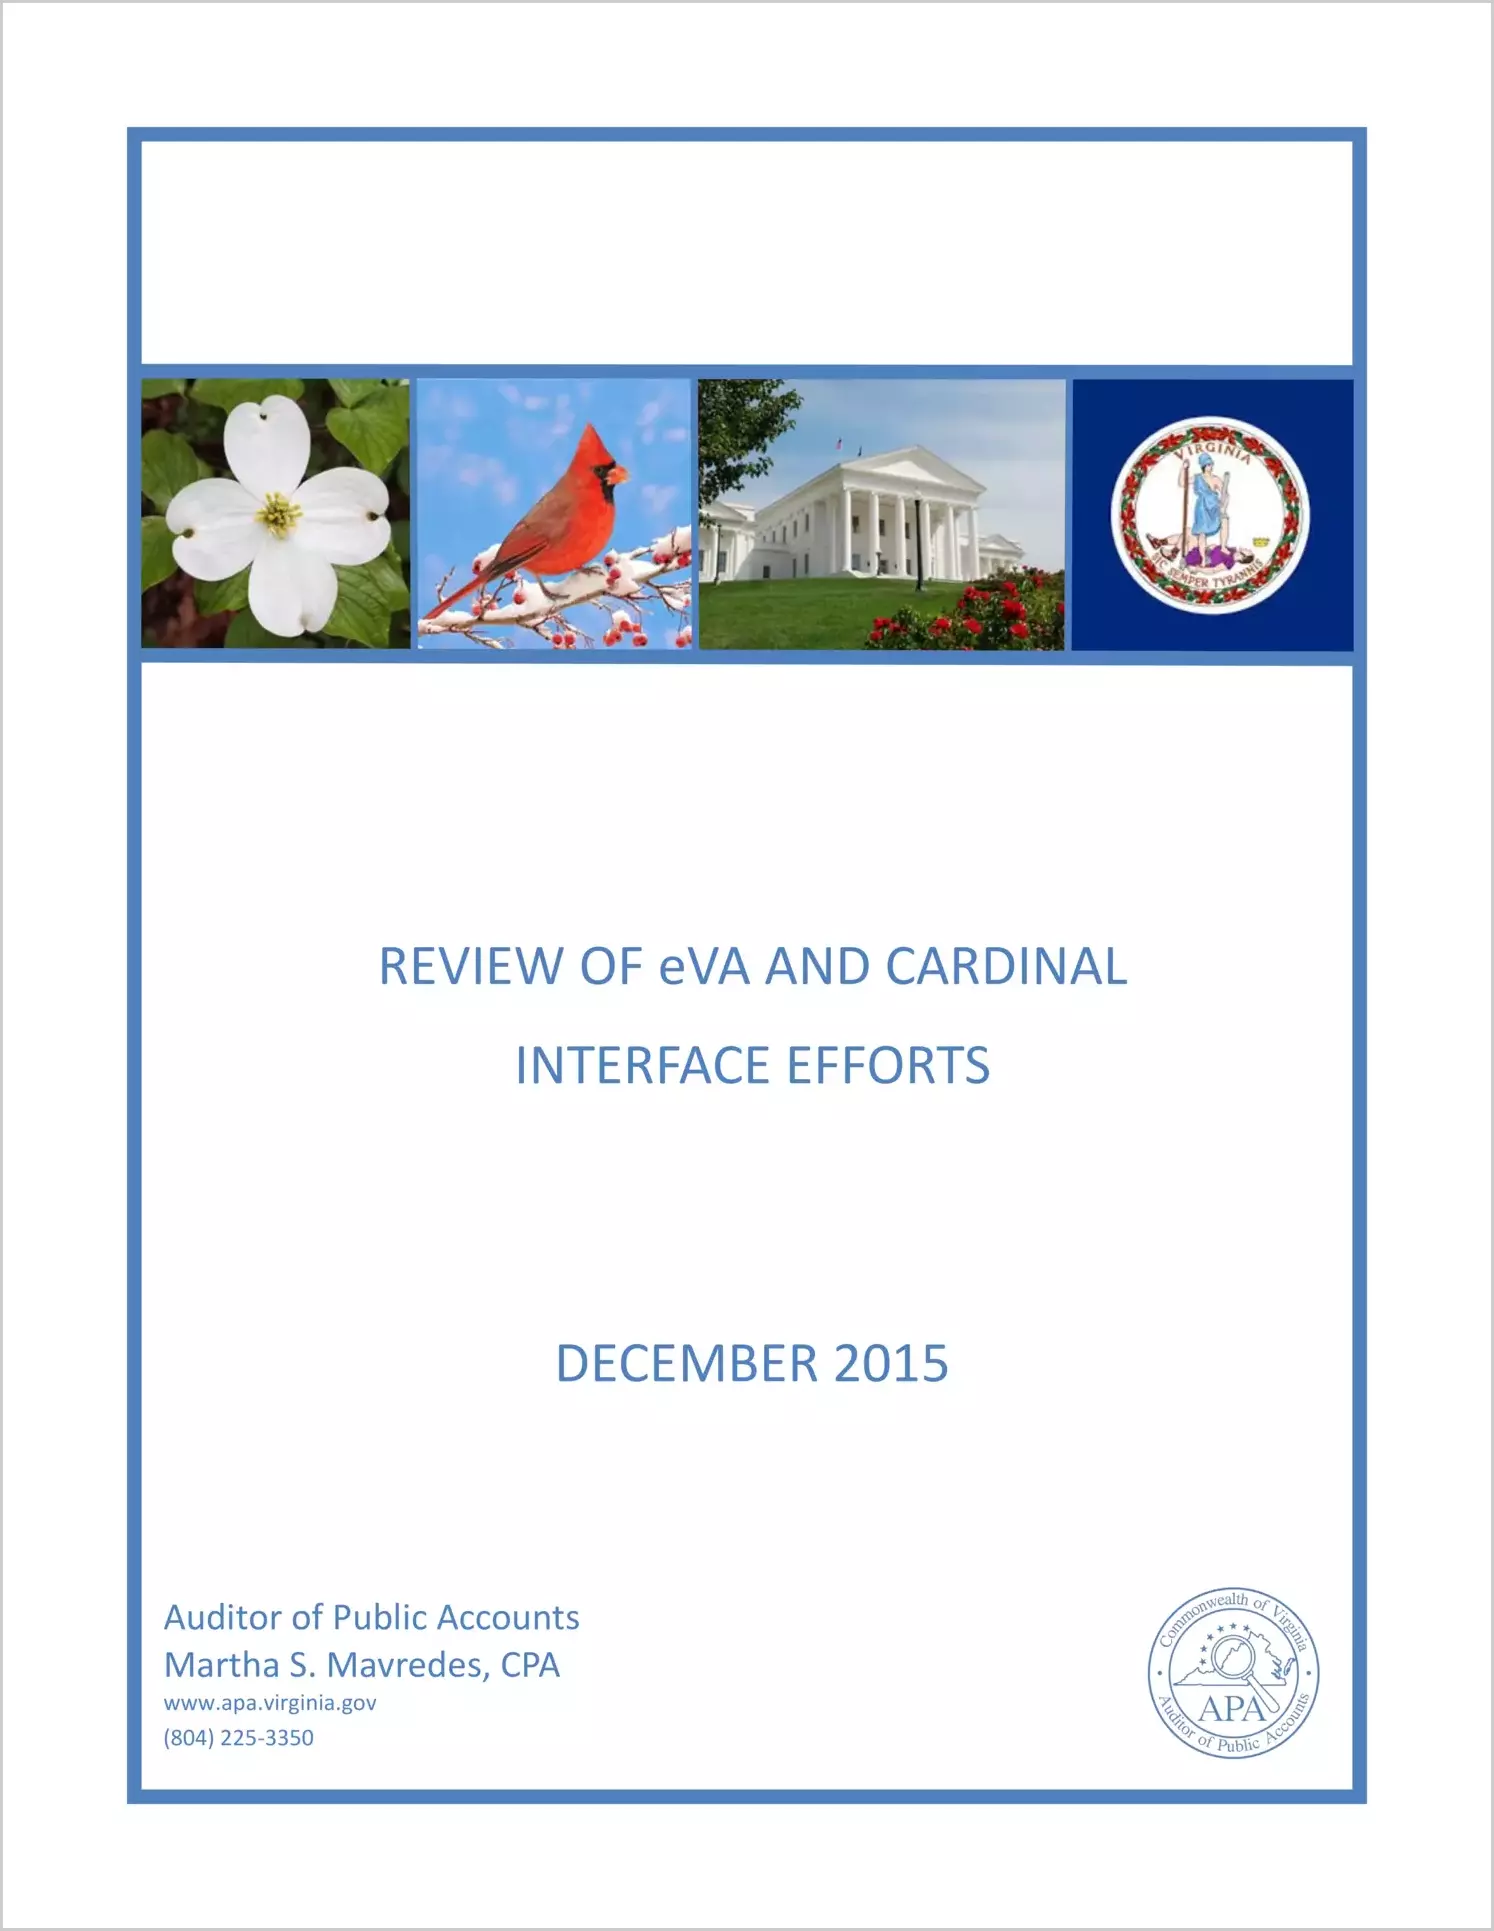 Review of eVA and Cardinal Interface Efforts as of December 2015